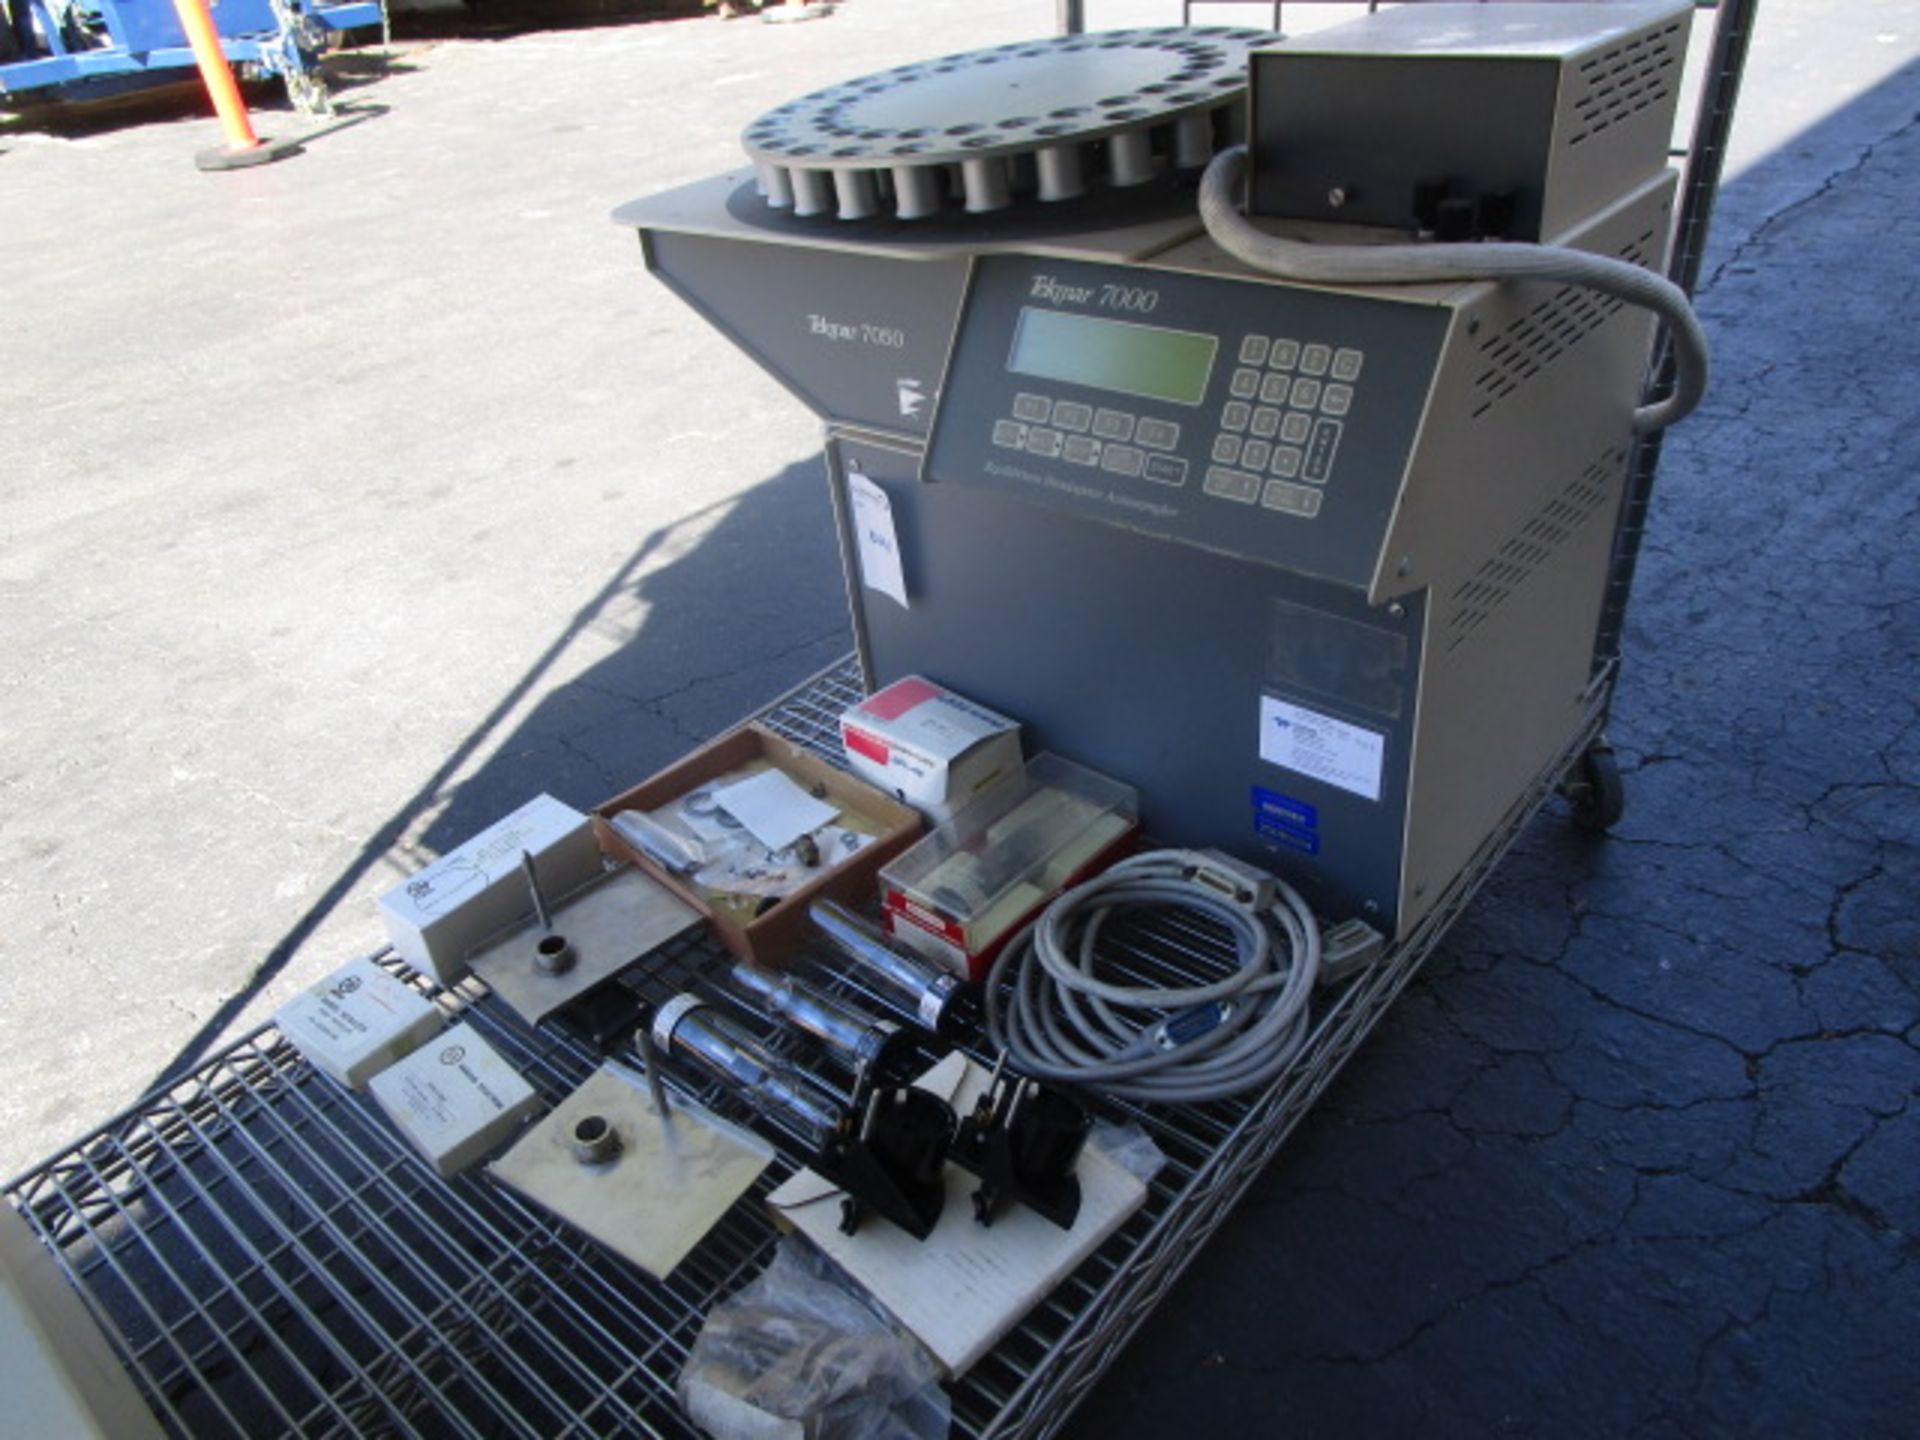 Tekmar 7000 equilibrium headspace Autosampler with Tekmar 7050 comes with accessories and cables - Image 11 of 12